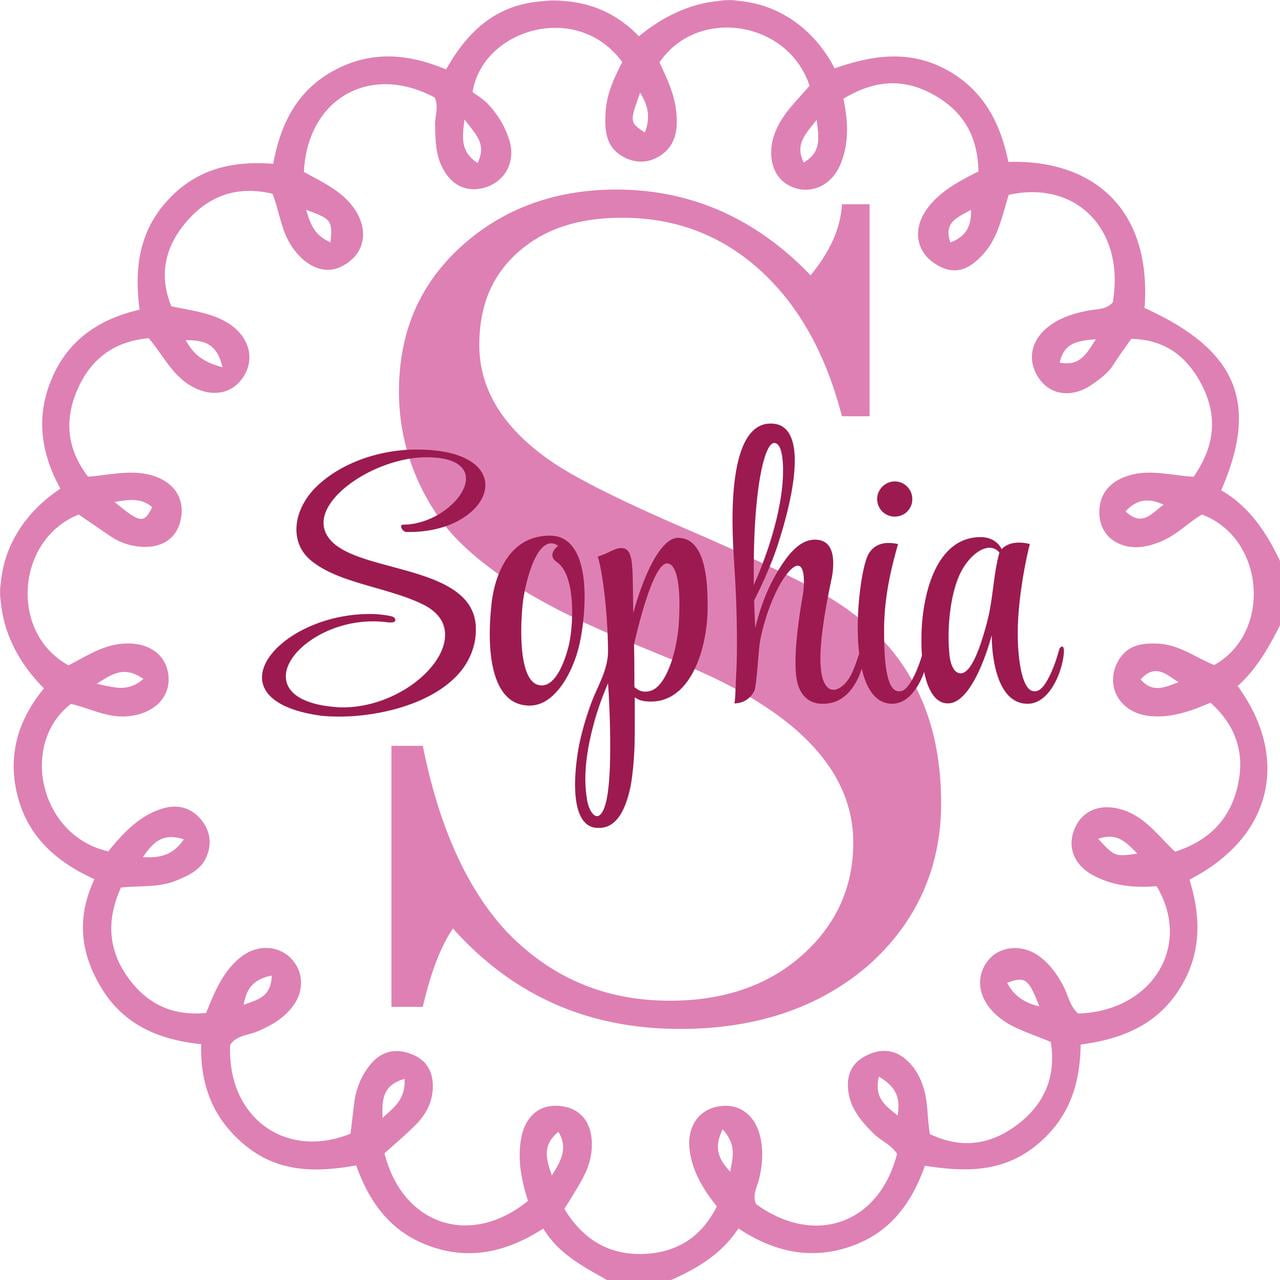 Details about   Name Wall Decal Personalized Teen Girl Room Decor Toddler Baby Nursery Sticker 